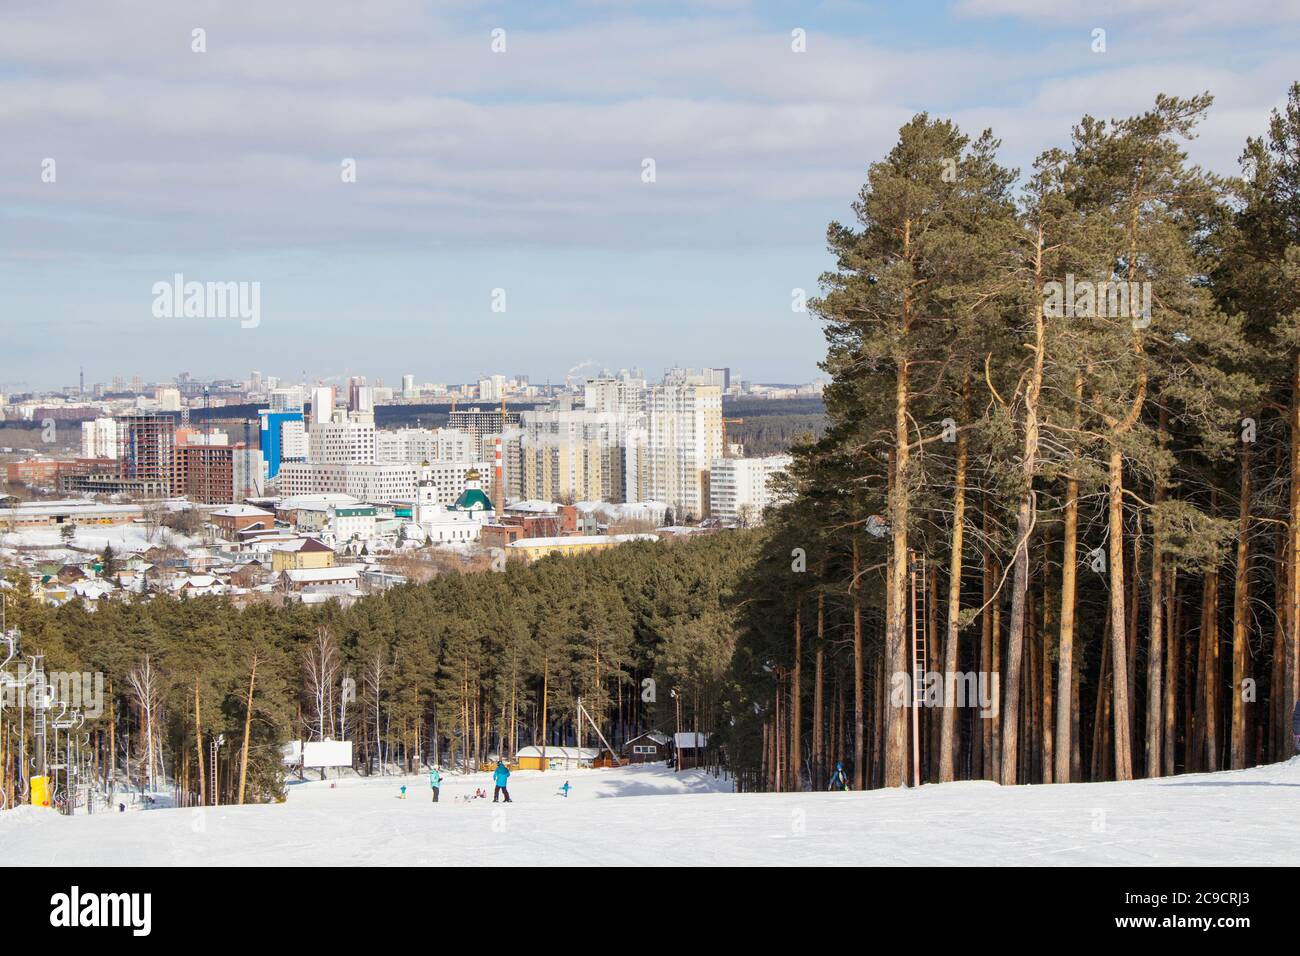 The training slope of the sports complex on Uktus Mountain framed by a pine forest. In the background a panorama of the city of Yekaterinburg, Russia Stock Photo